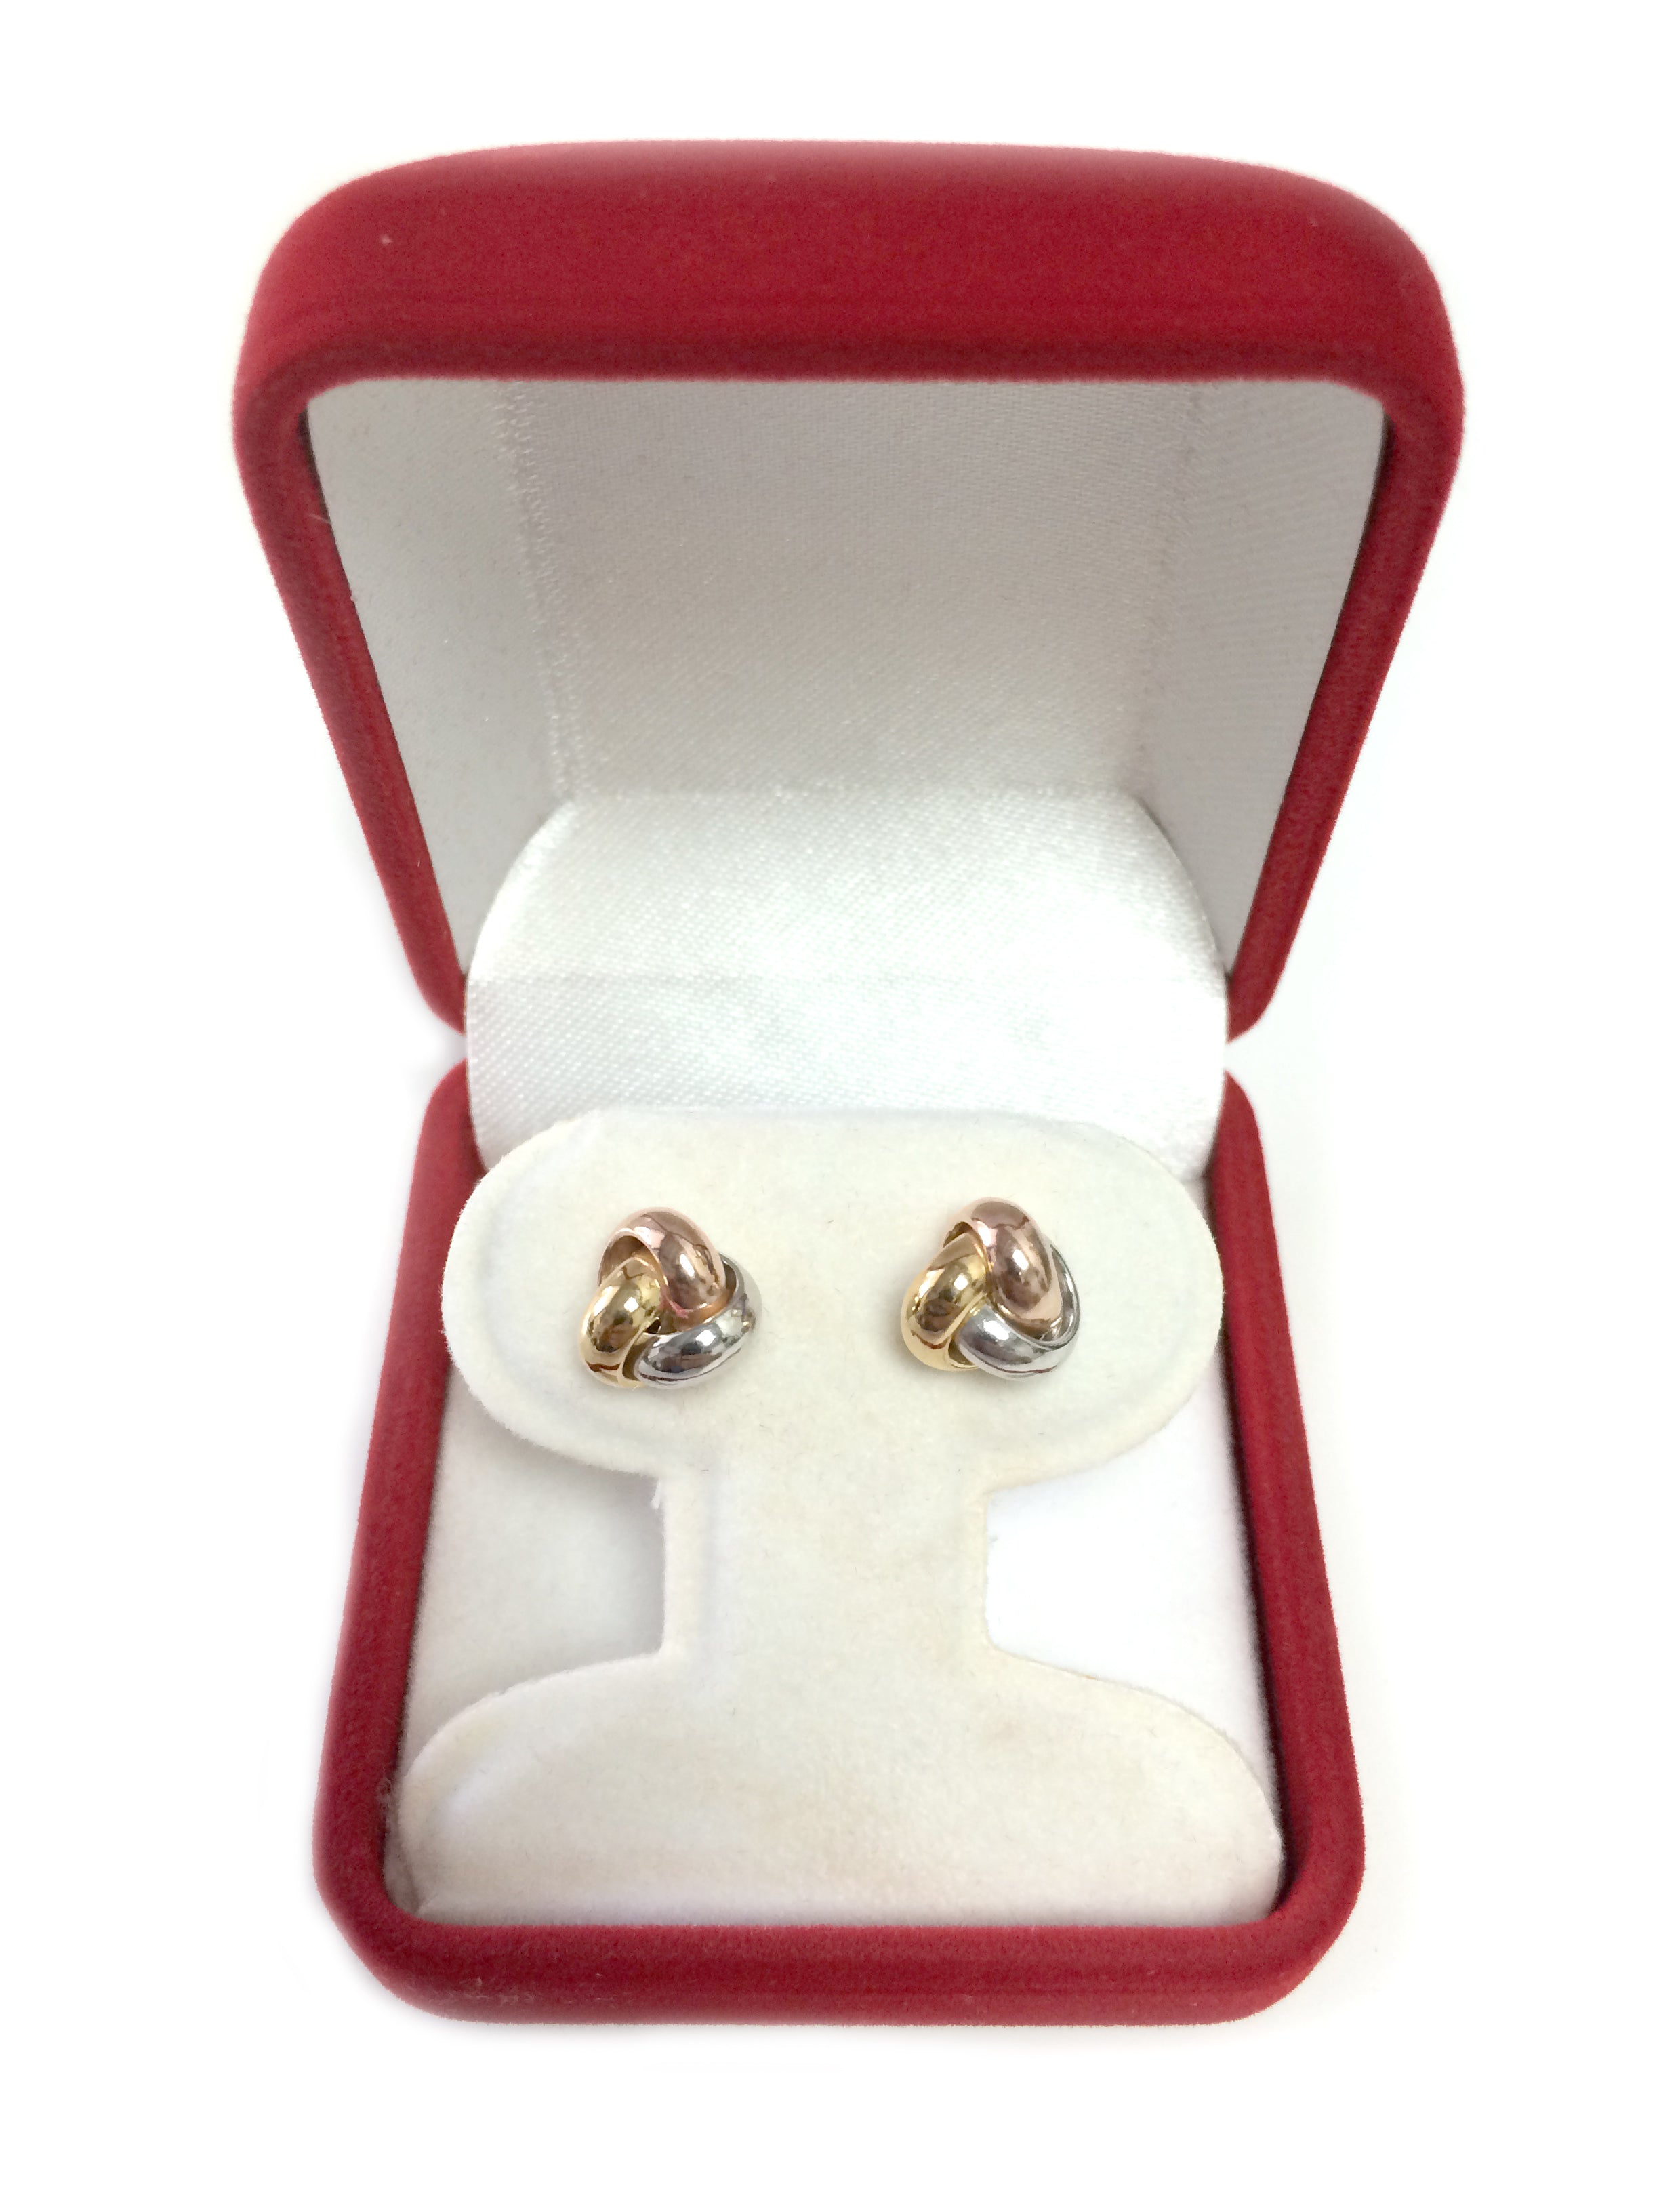 14k Tricolor Yellow White And Rose Gold Shiny Love Knot Stud Earrings, 9mm